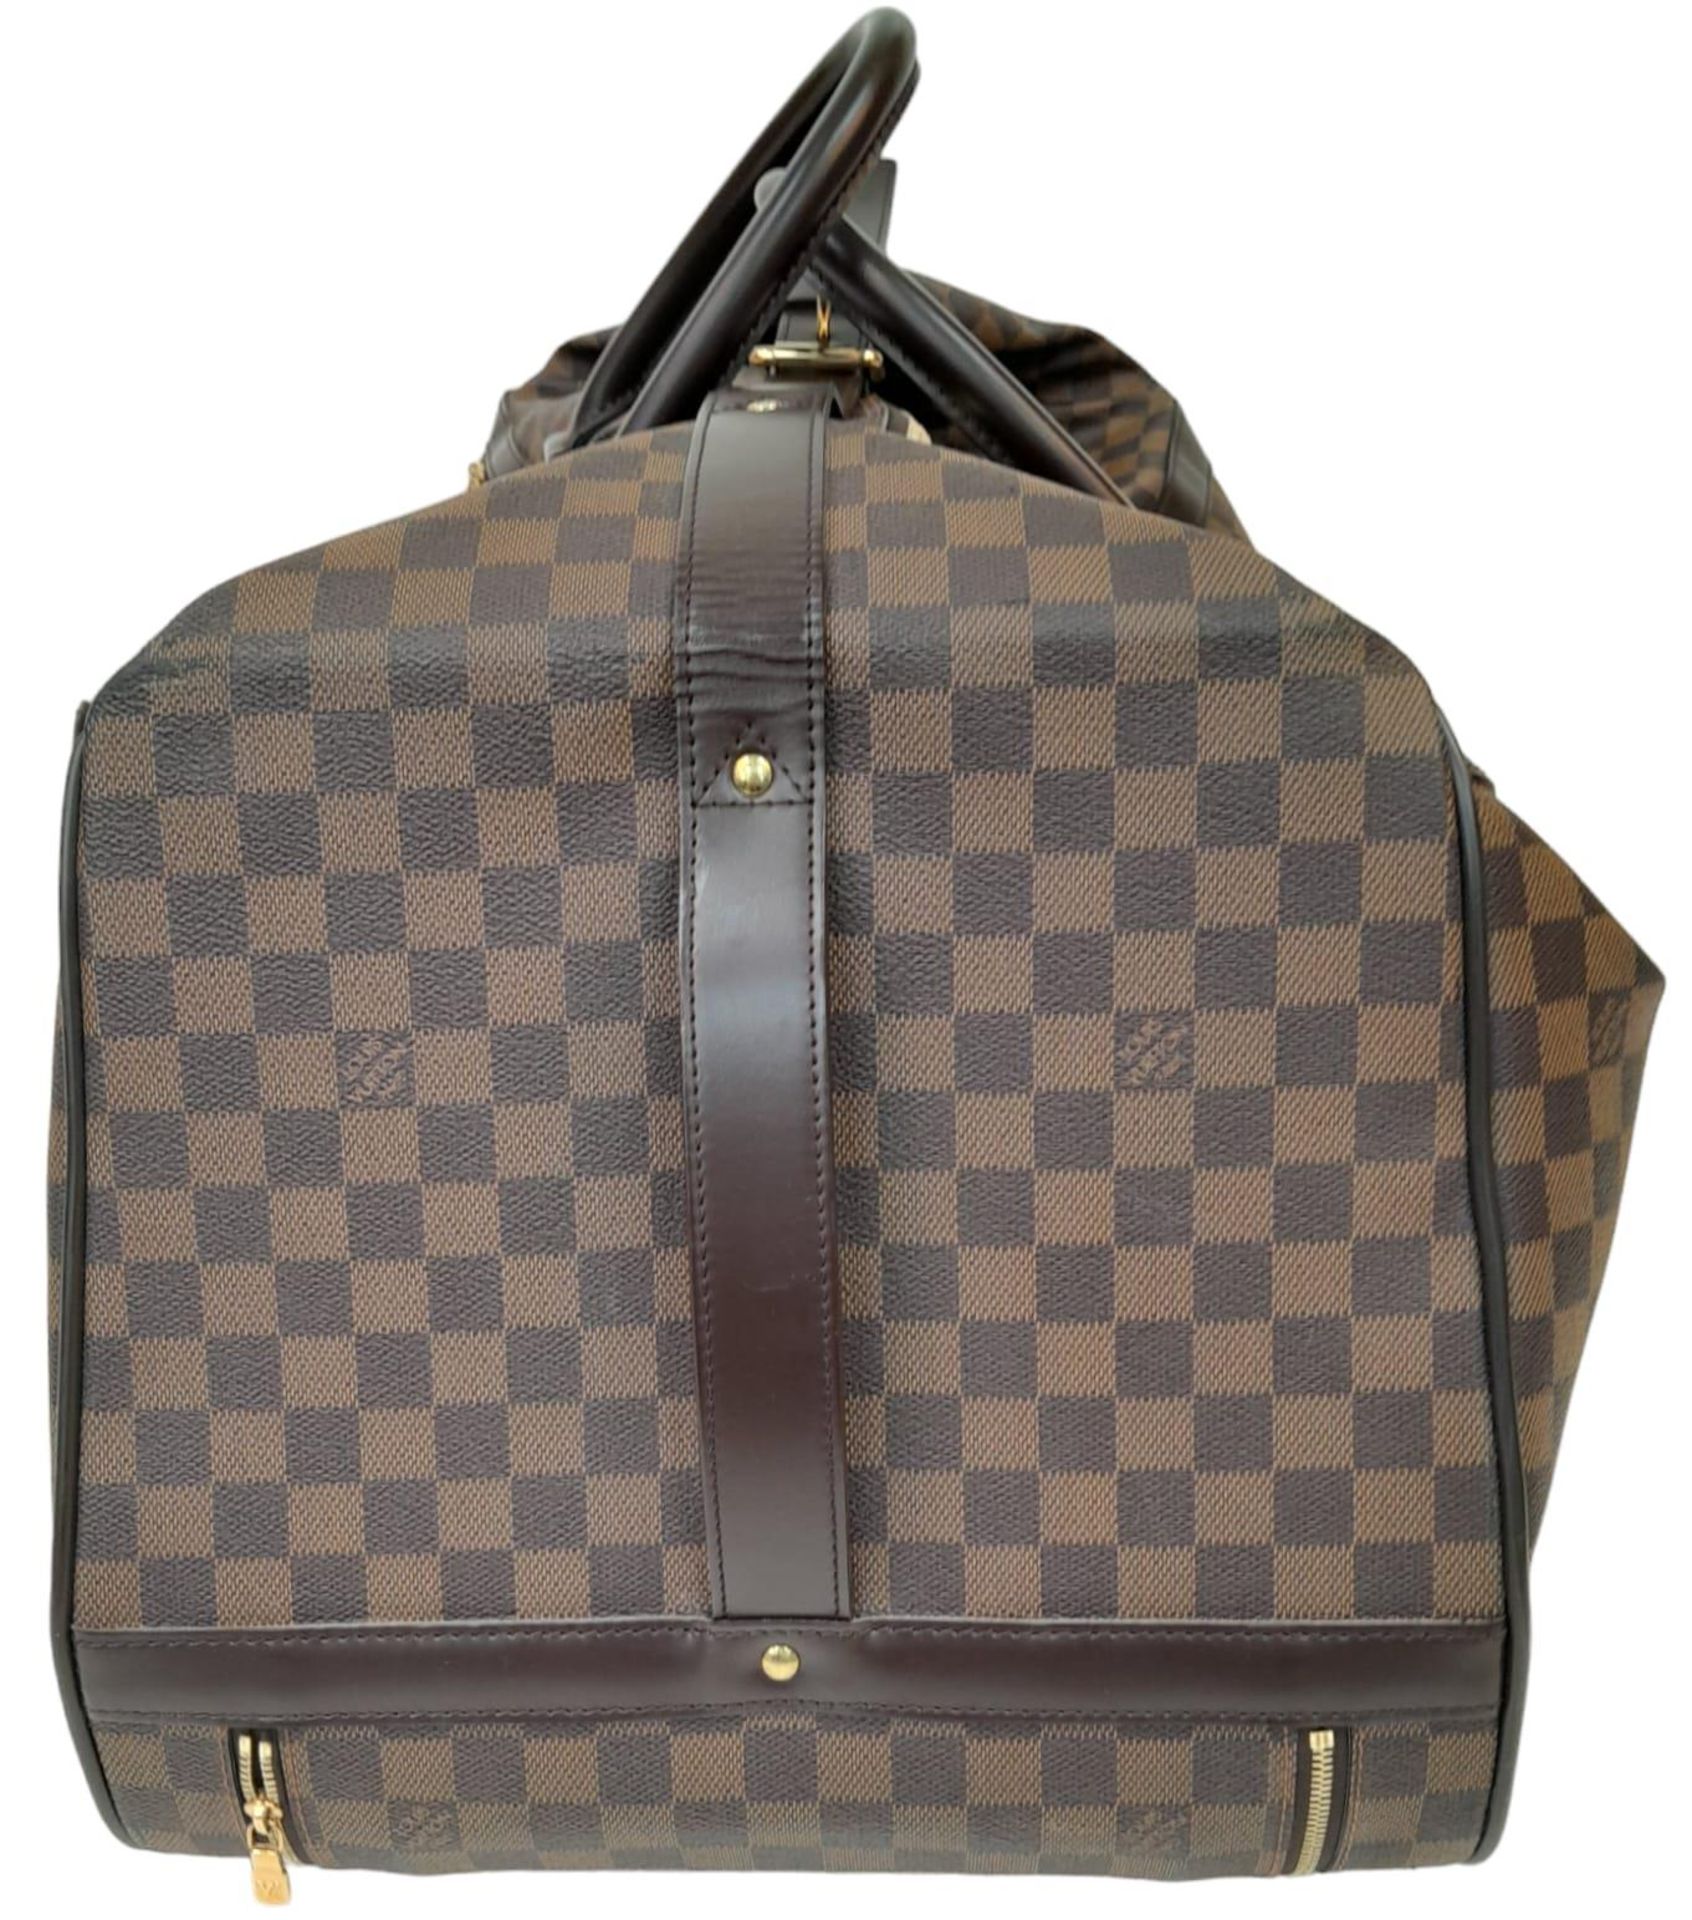 A Louis Vuitton Damier Ebene Eole Convertible Travel Bag. Leather exterior with gold-toned hardware, - Image 4 of 10